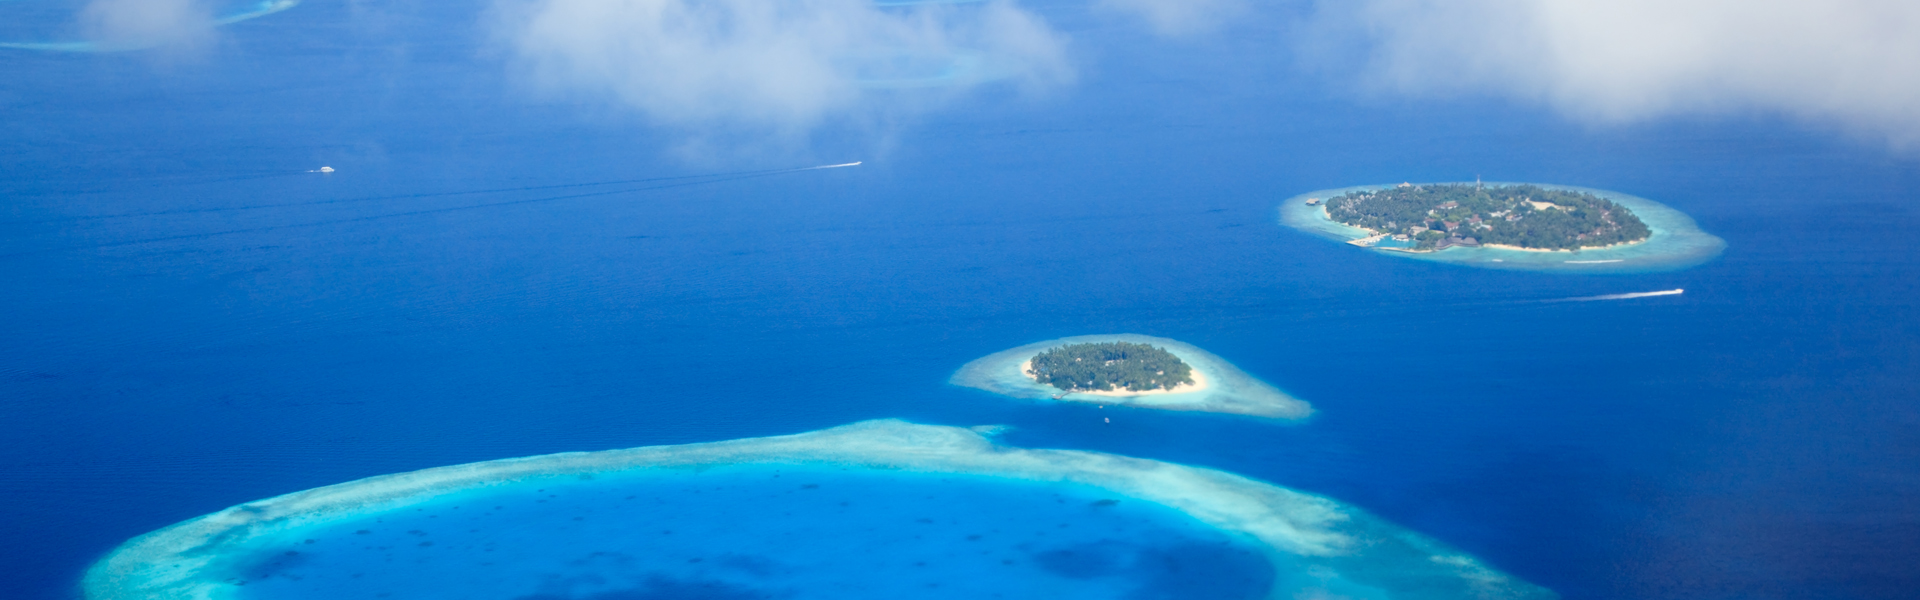 Islands and lagoon in the Maldives